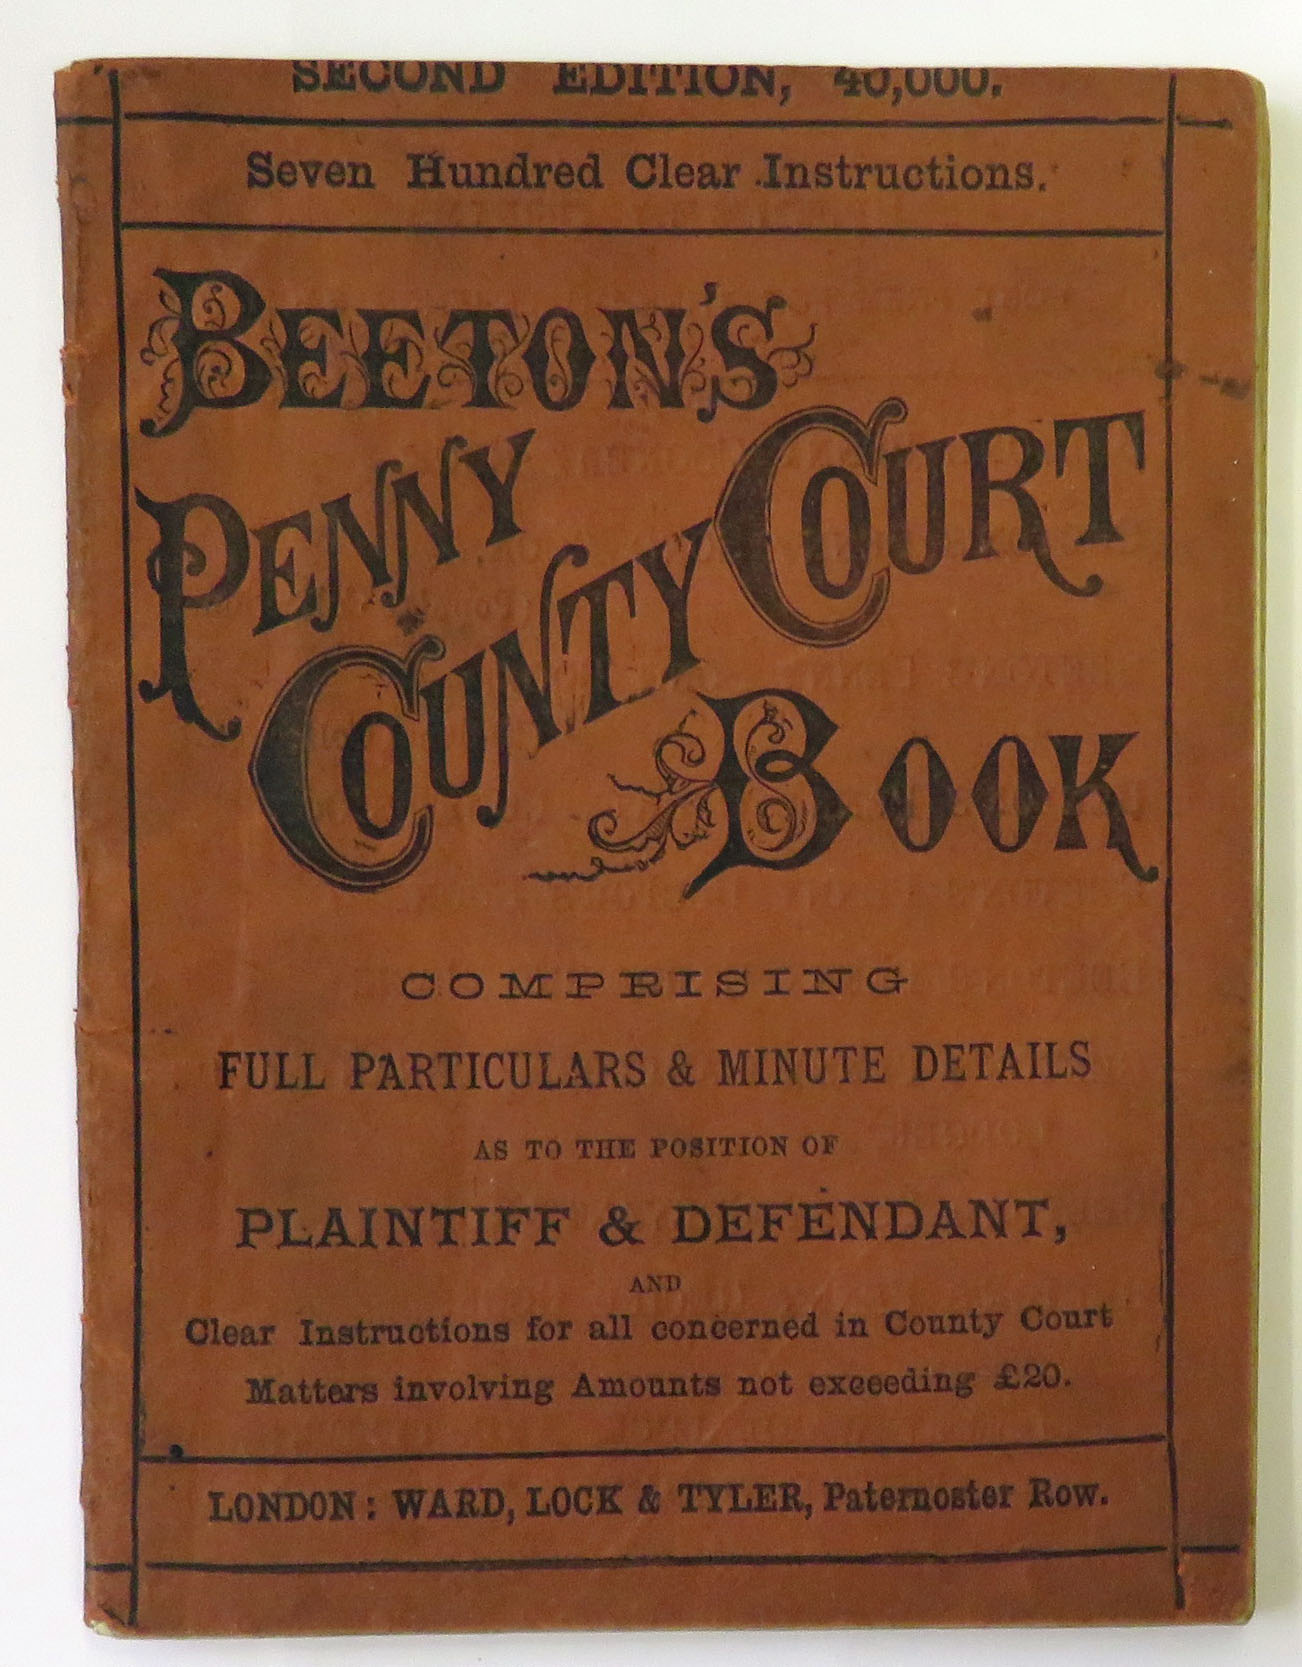 Beeton's Penny County Court Book